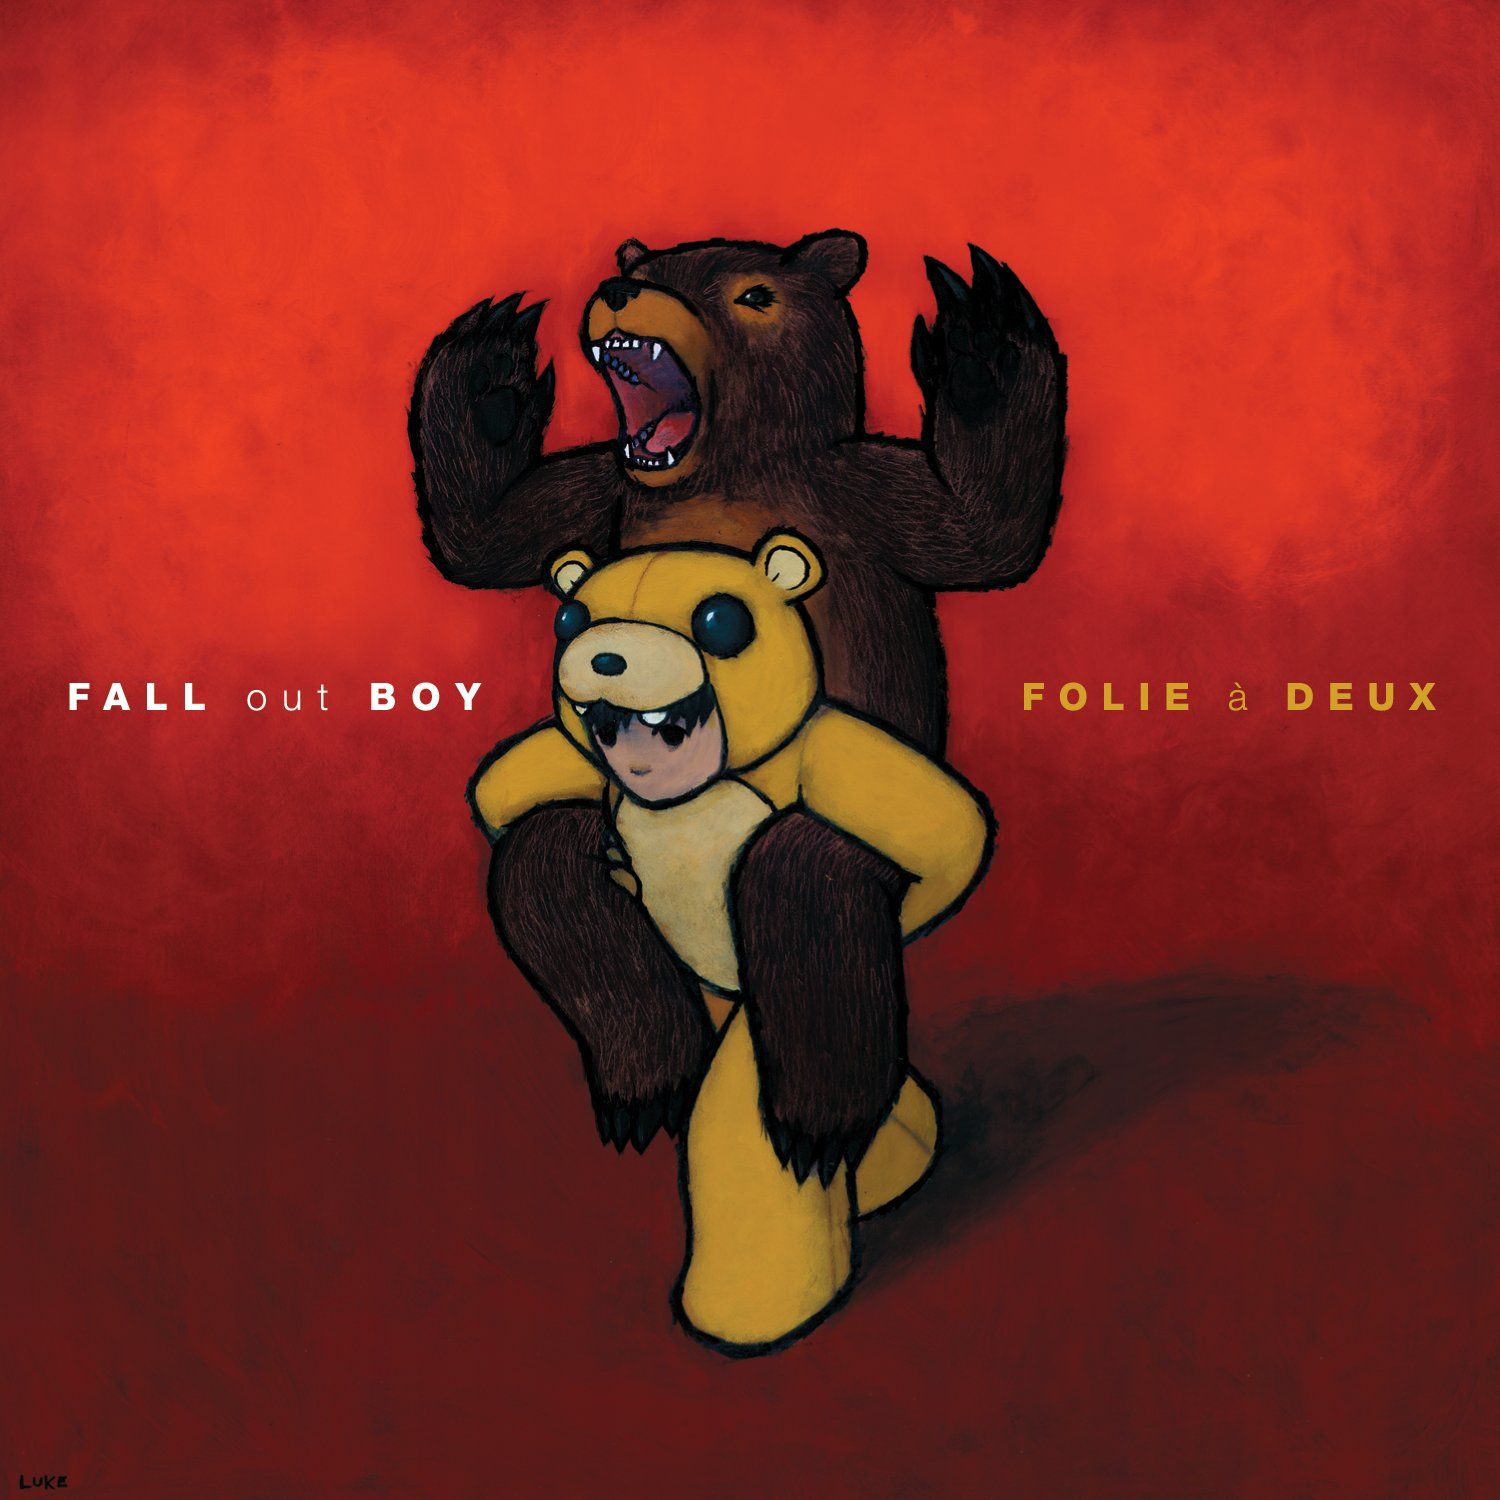 Album cover of Folie á Deux. Against a red background, a person in a pale-brown bear suit carries a dark brown bear on their back. The dark brown bear has its mouth open in a snarl, paws raised.